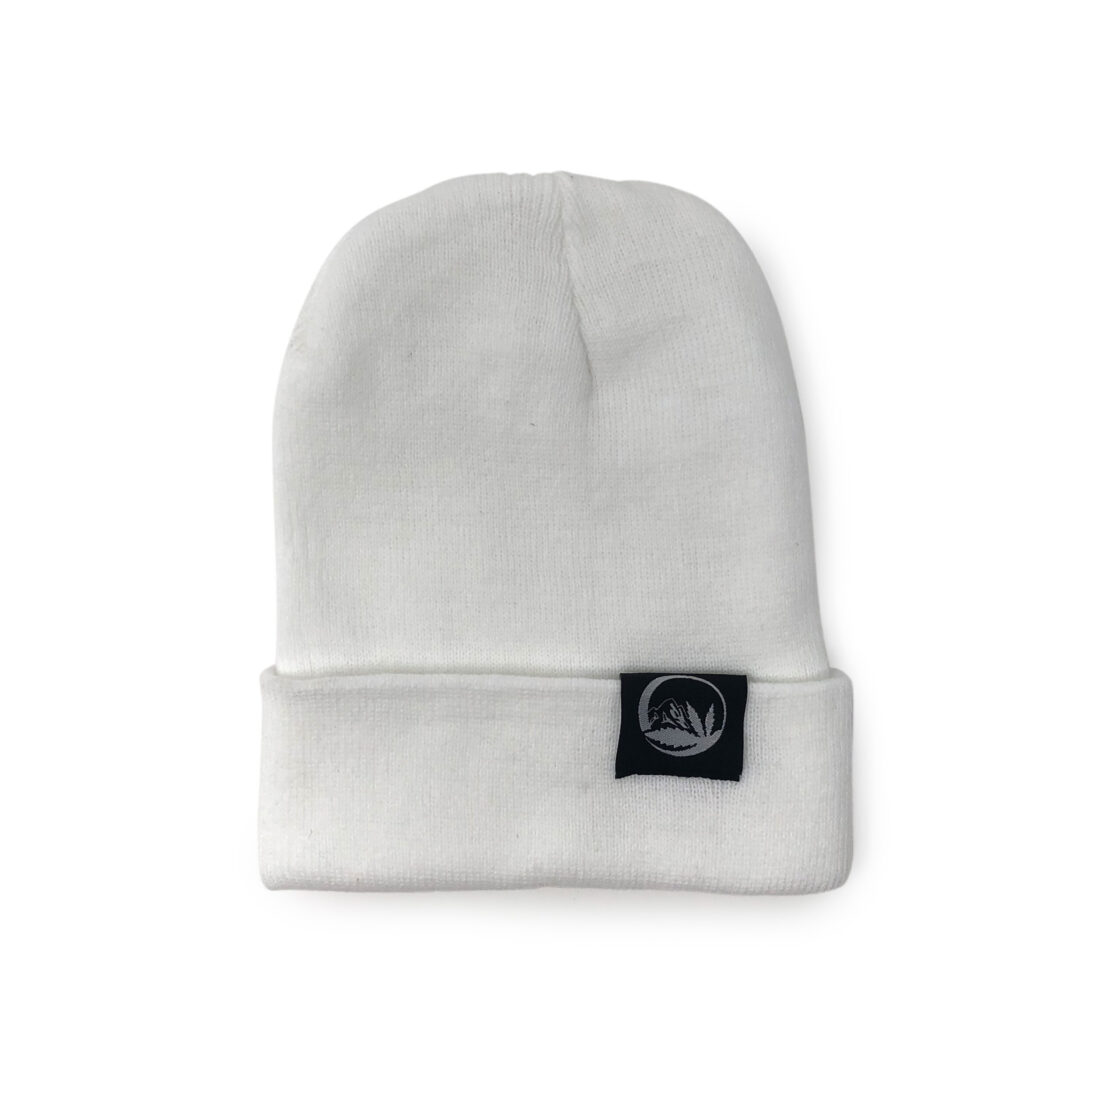 Buy Classic White Toque Online In Canada - Pacific Grass